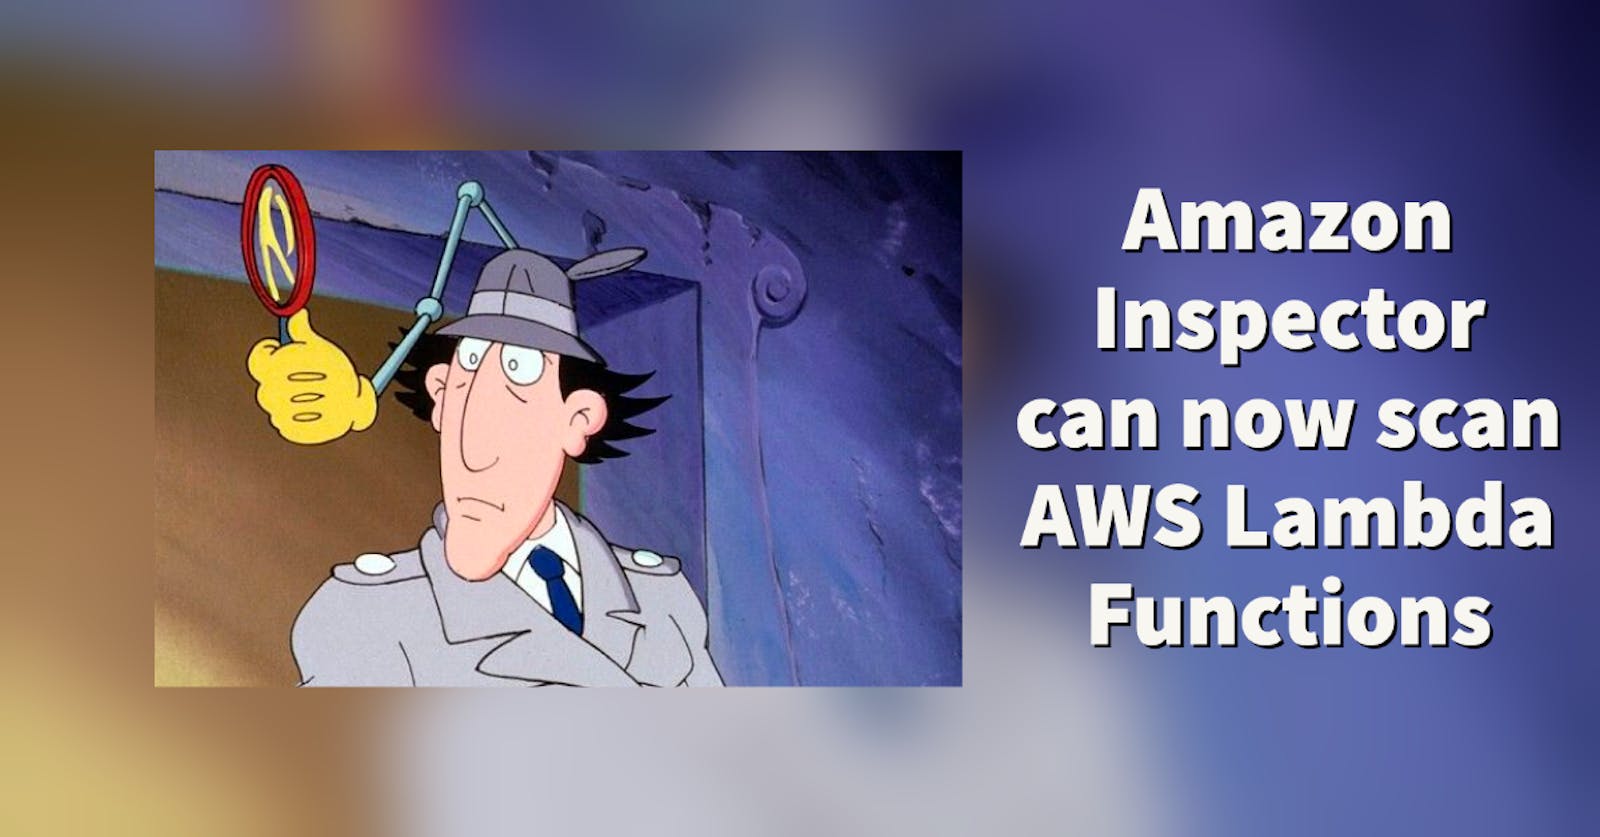 Amazon Inspector can now scan AWS Lambda Functions